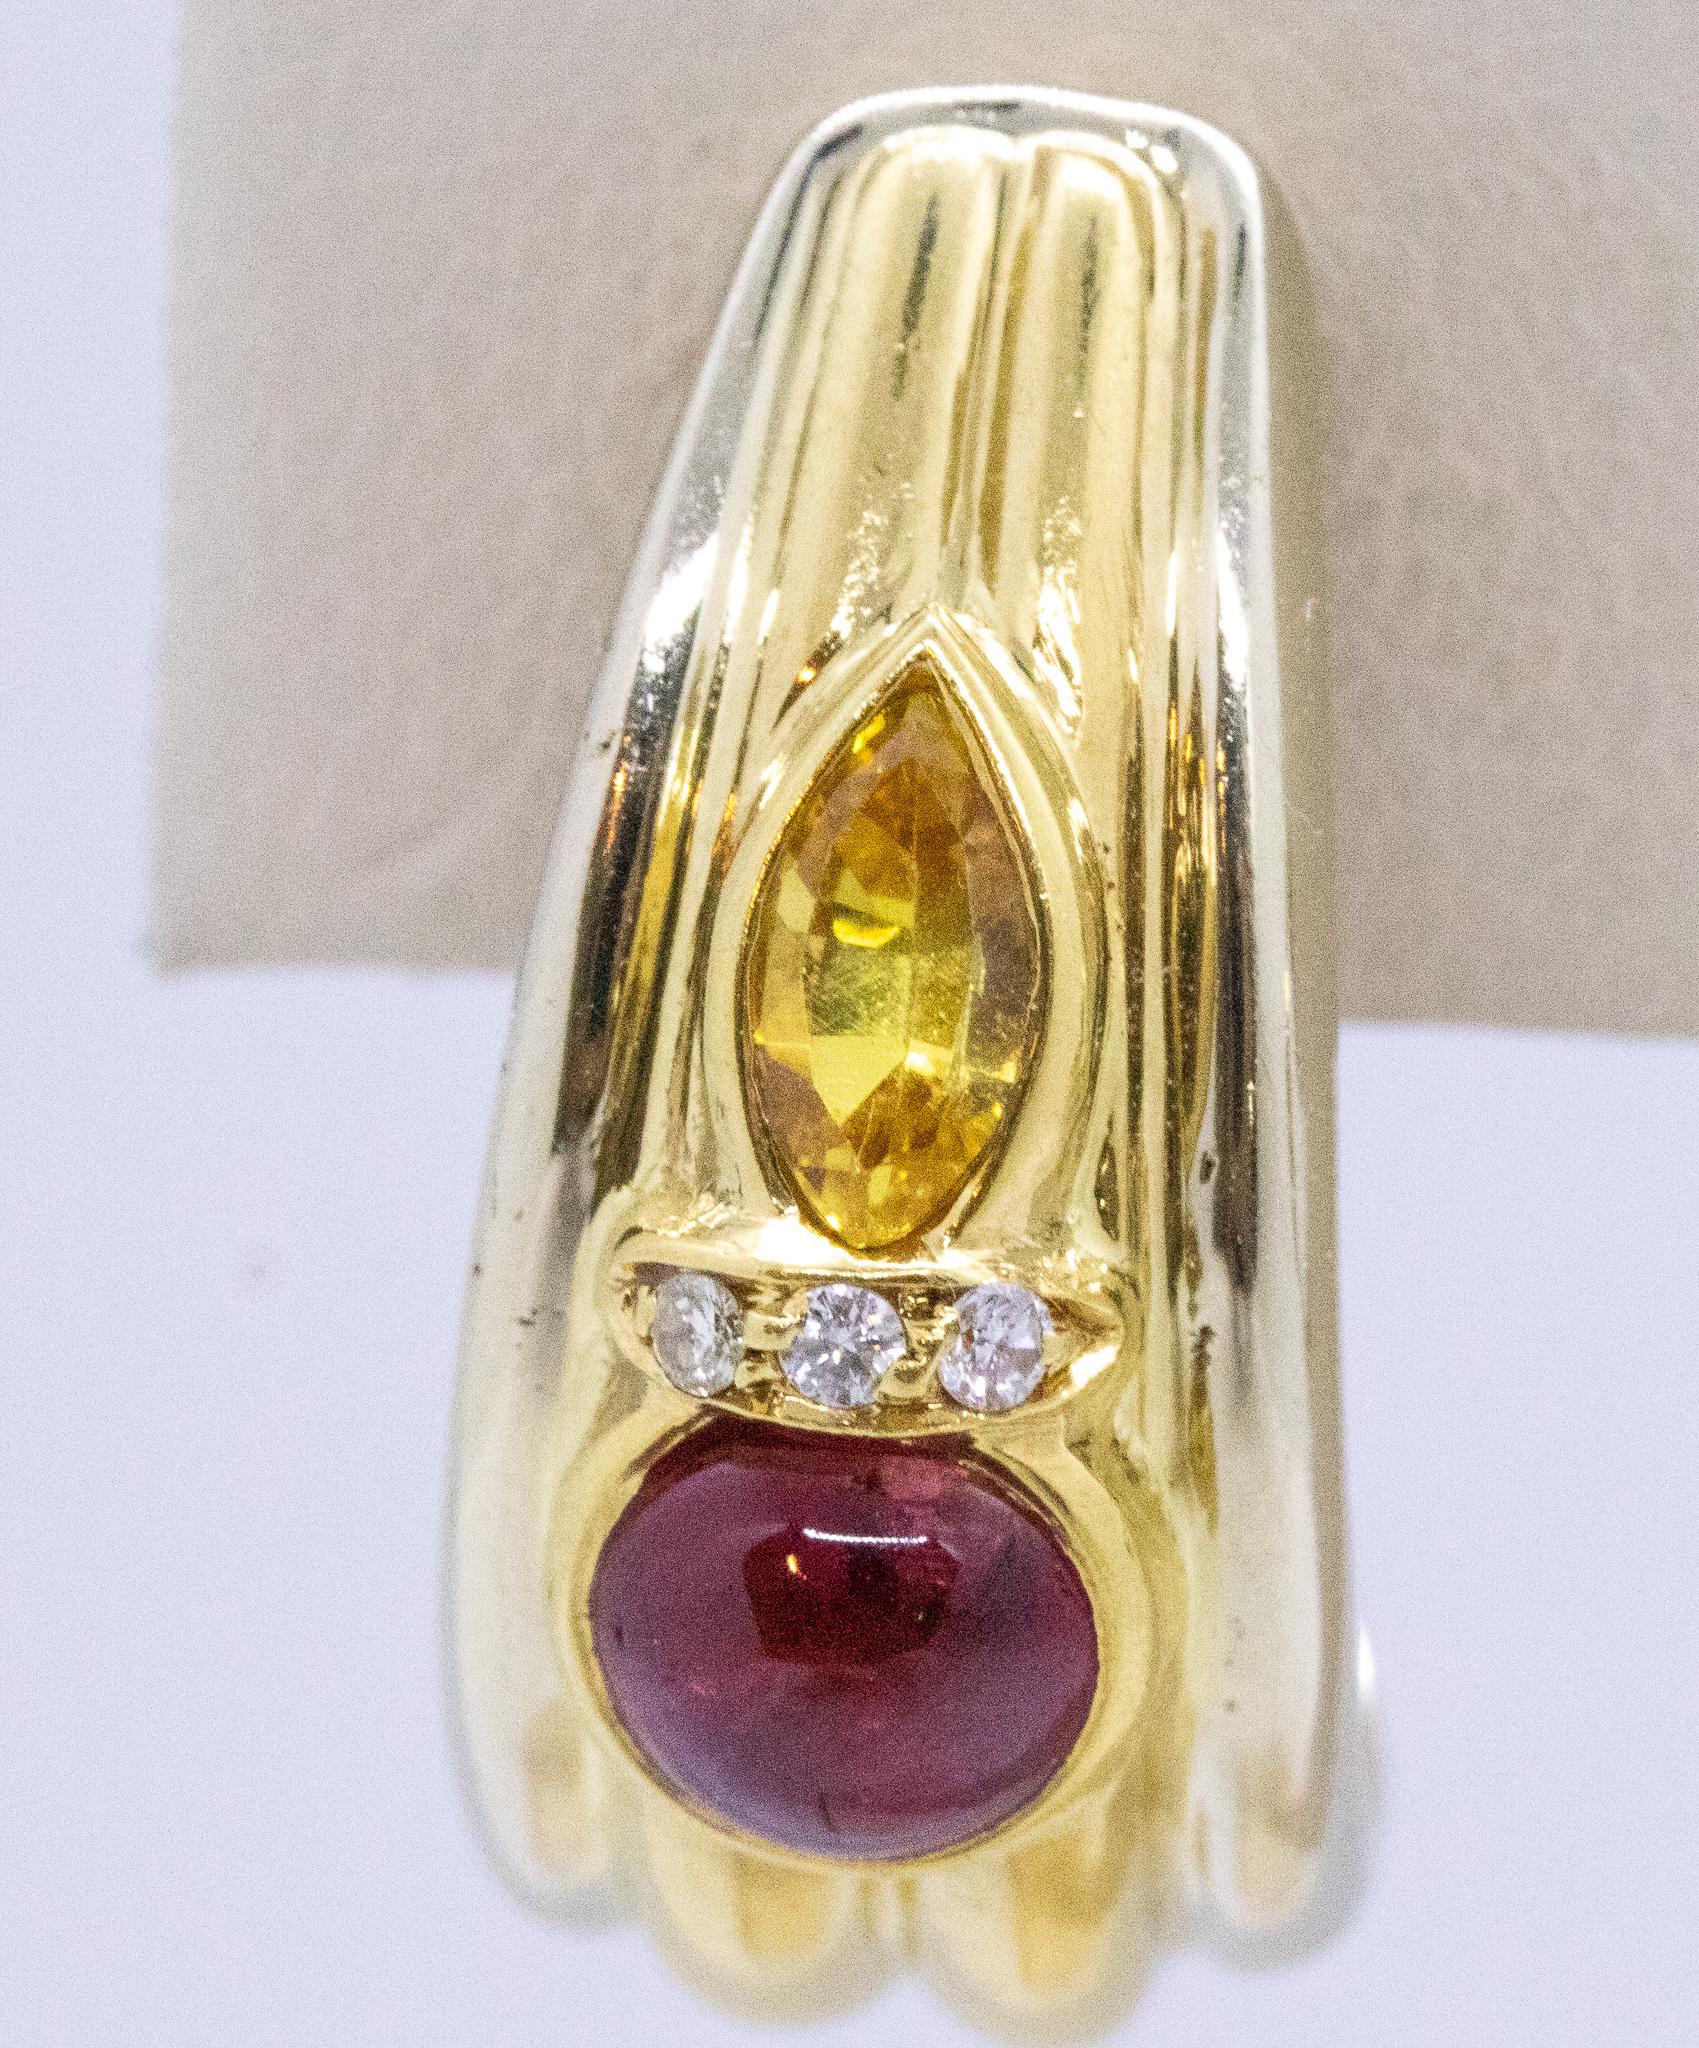 Chaumet Paris Clips Earrings in 18Kt Gold with 2.34 Cts Rubies Sapphires Diamond For Sale 4